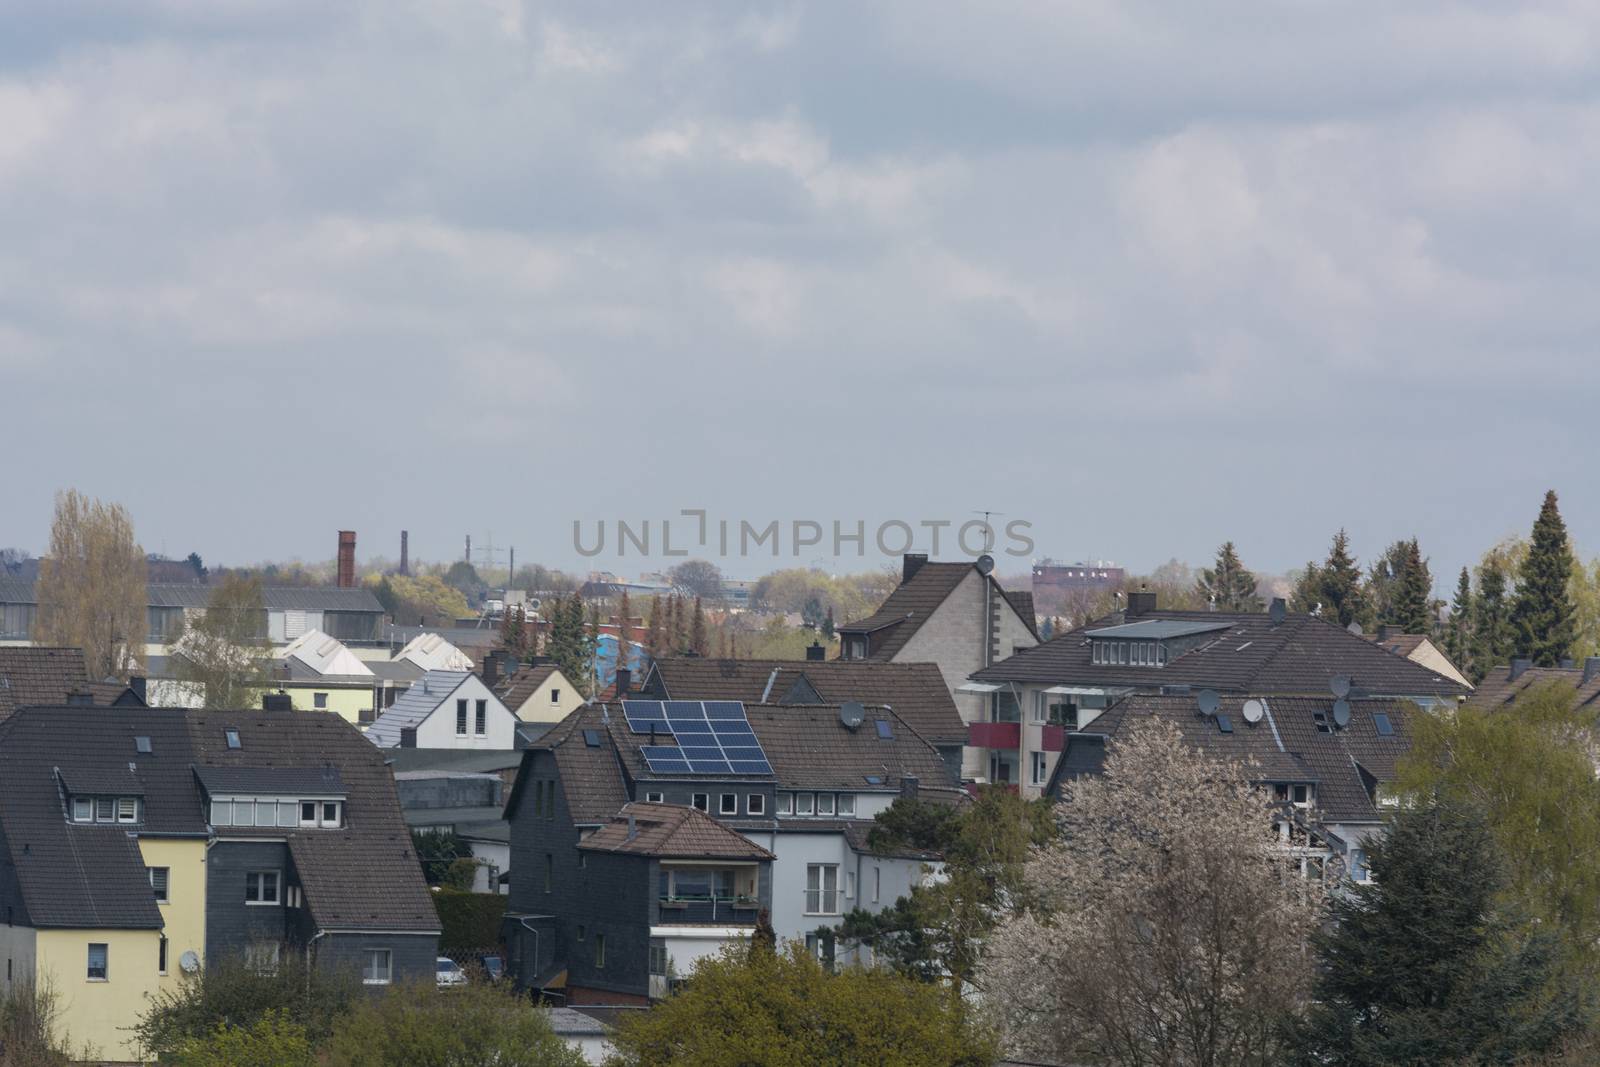 Panoramic shot, skyline of the city of Velbert
with sights